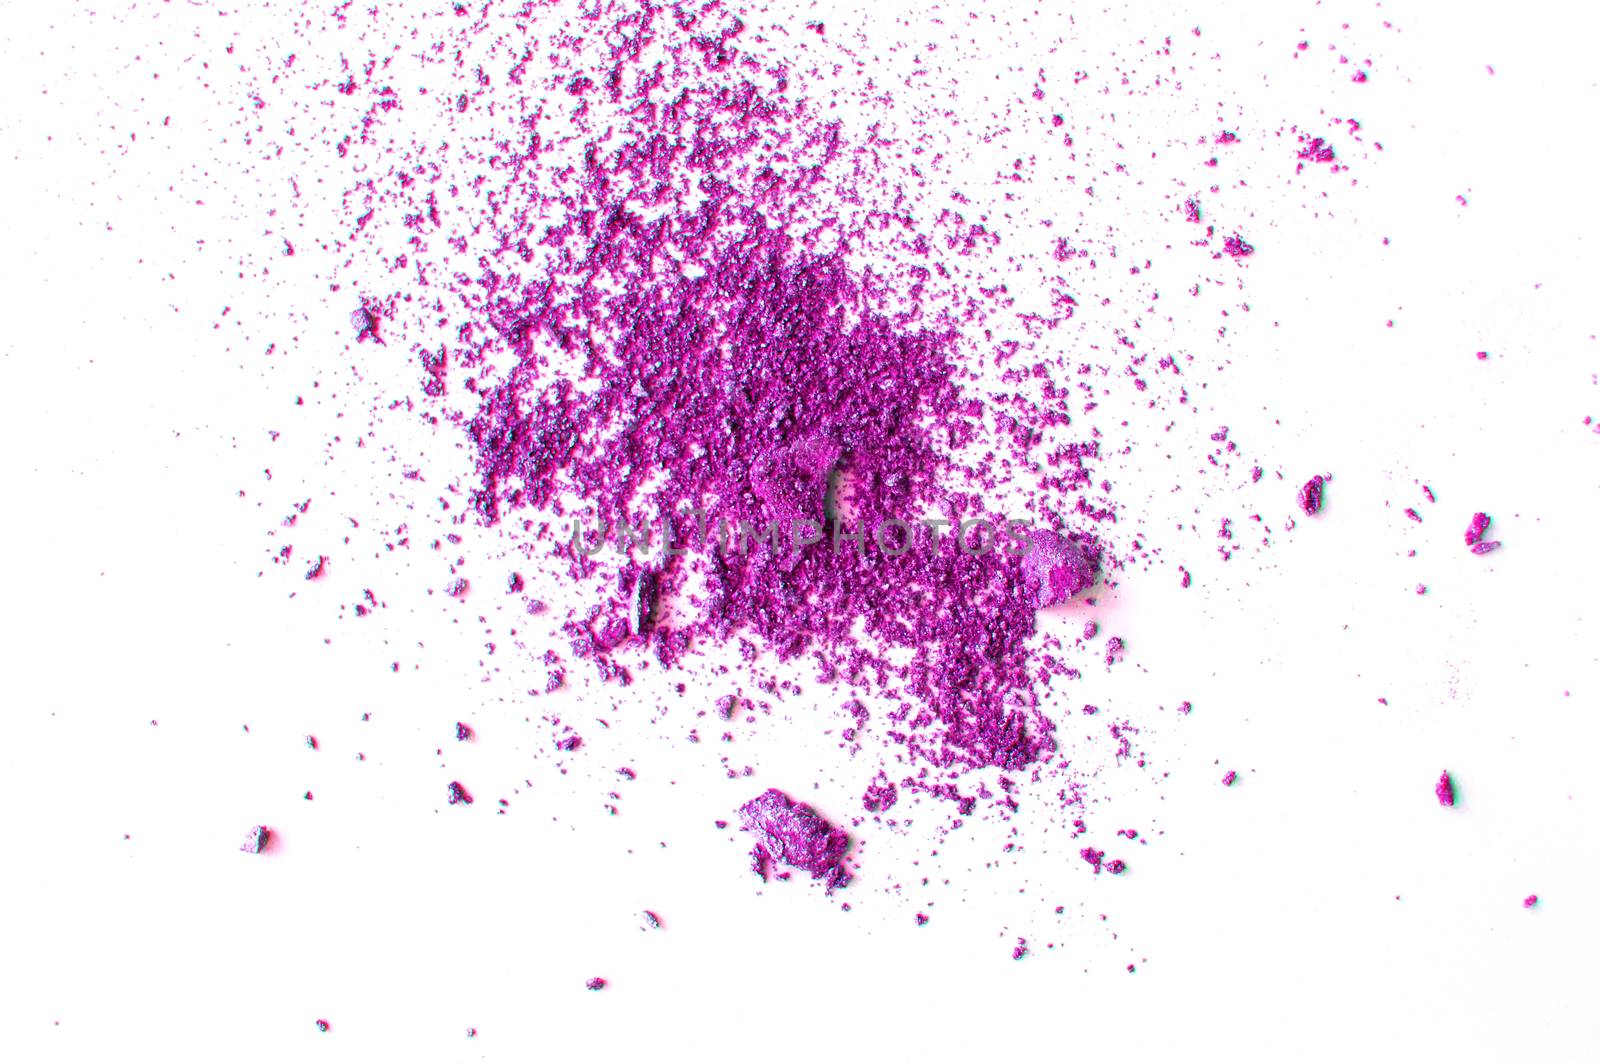 Lilac or purple eyeshadow, scattered crumbs isolated on white background, beauty and makeup concept by claire_lucia